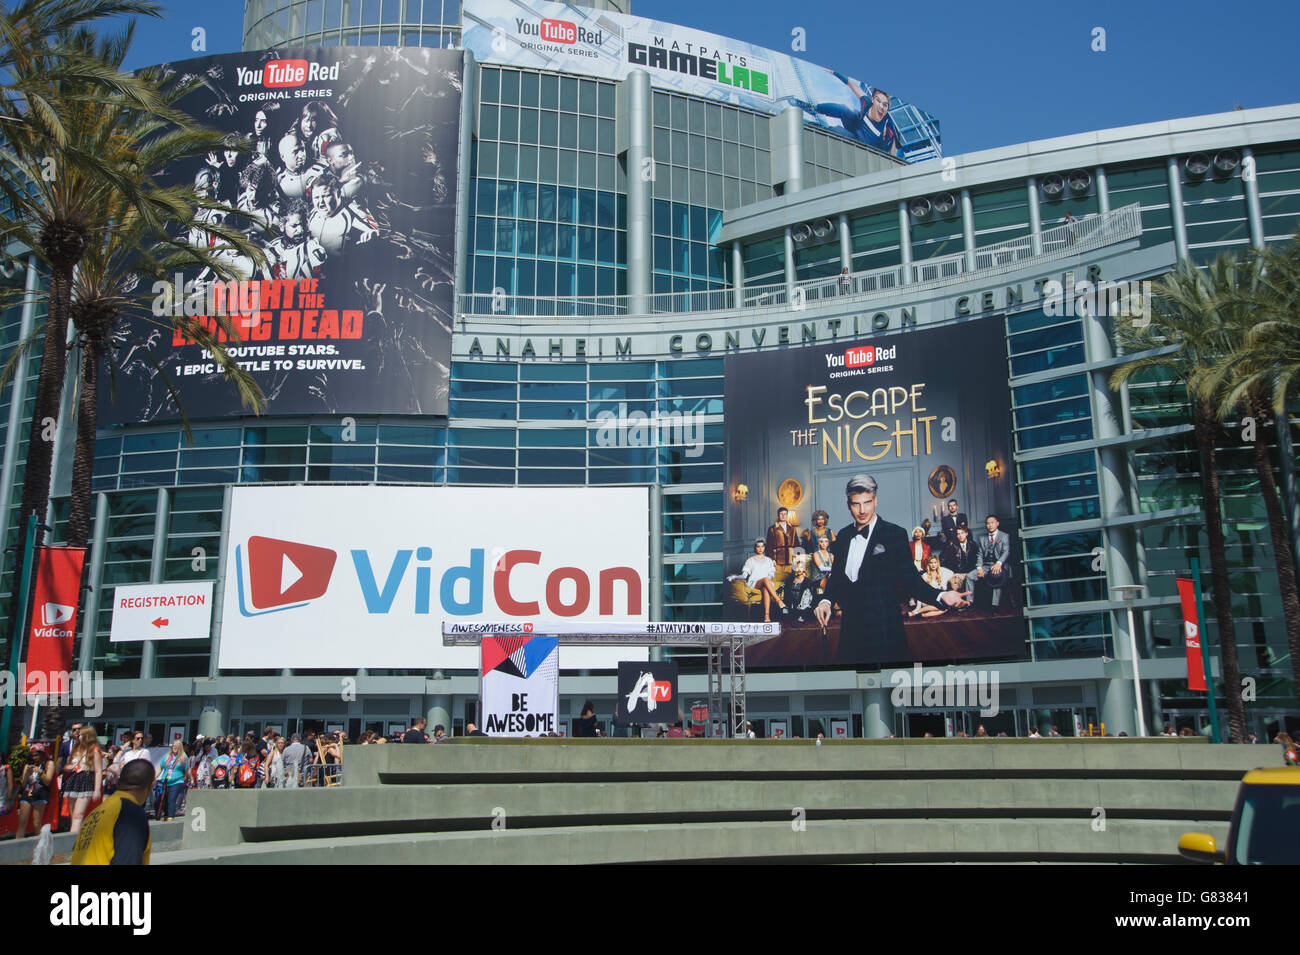 VidCon conference for YouTube creators, influencers, industry experts